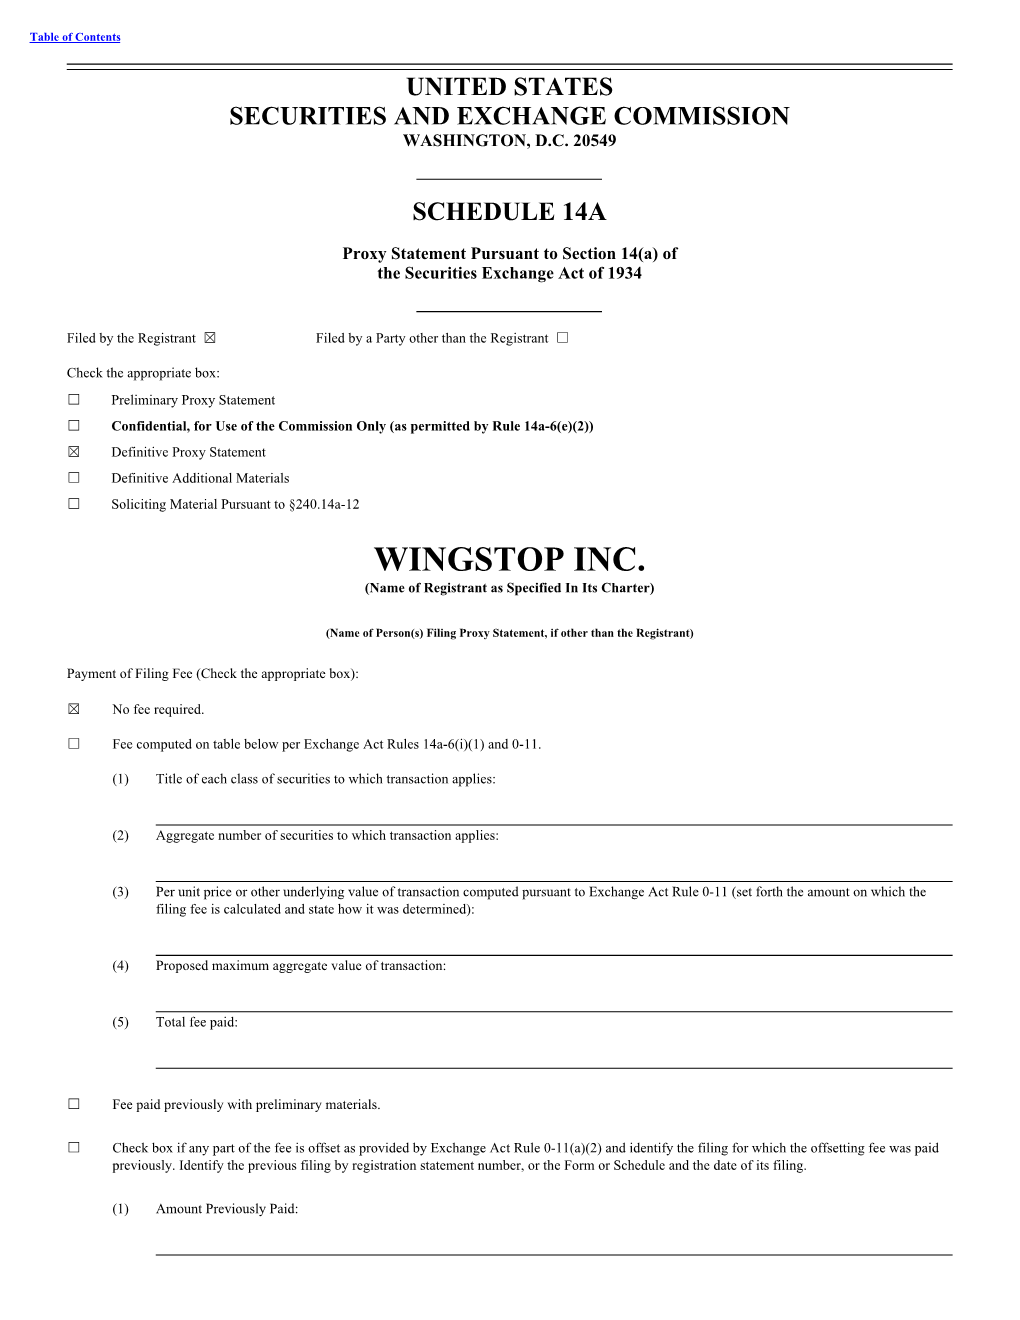 WINGSTOP INC. (Name of Registrant As Specified in Its Charter)